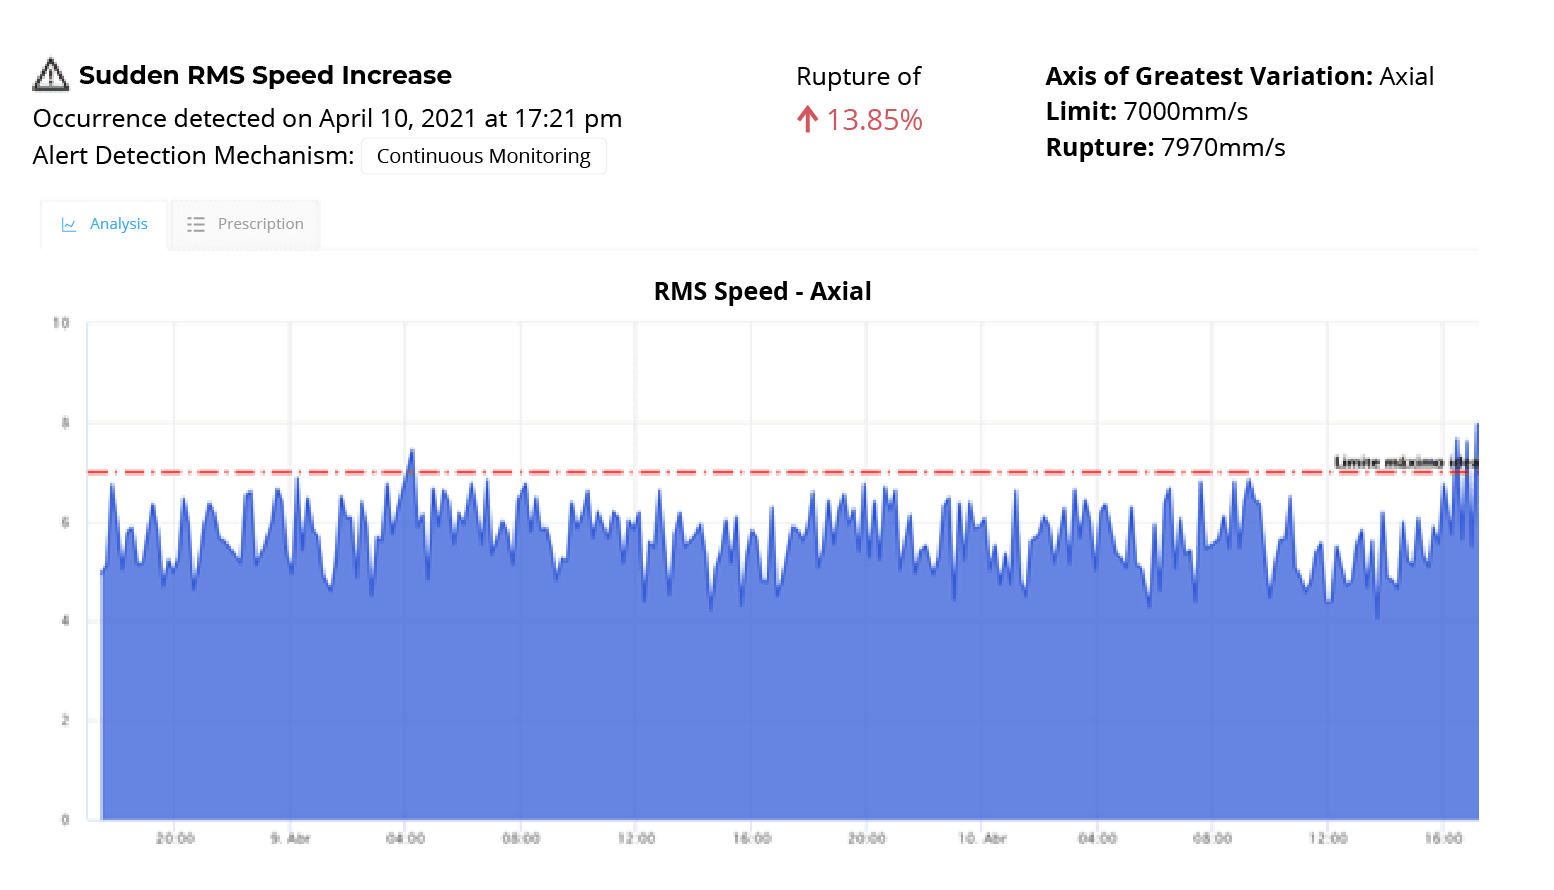 Sudden RMS speed increase detected on graph